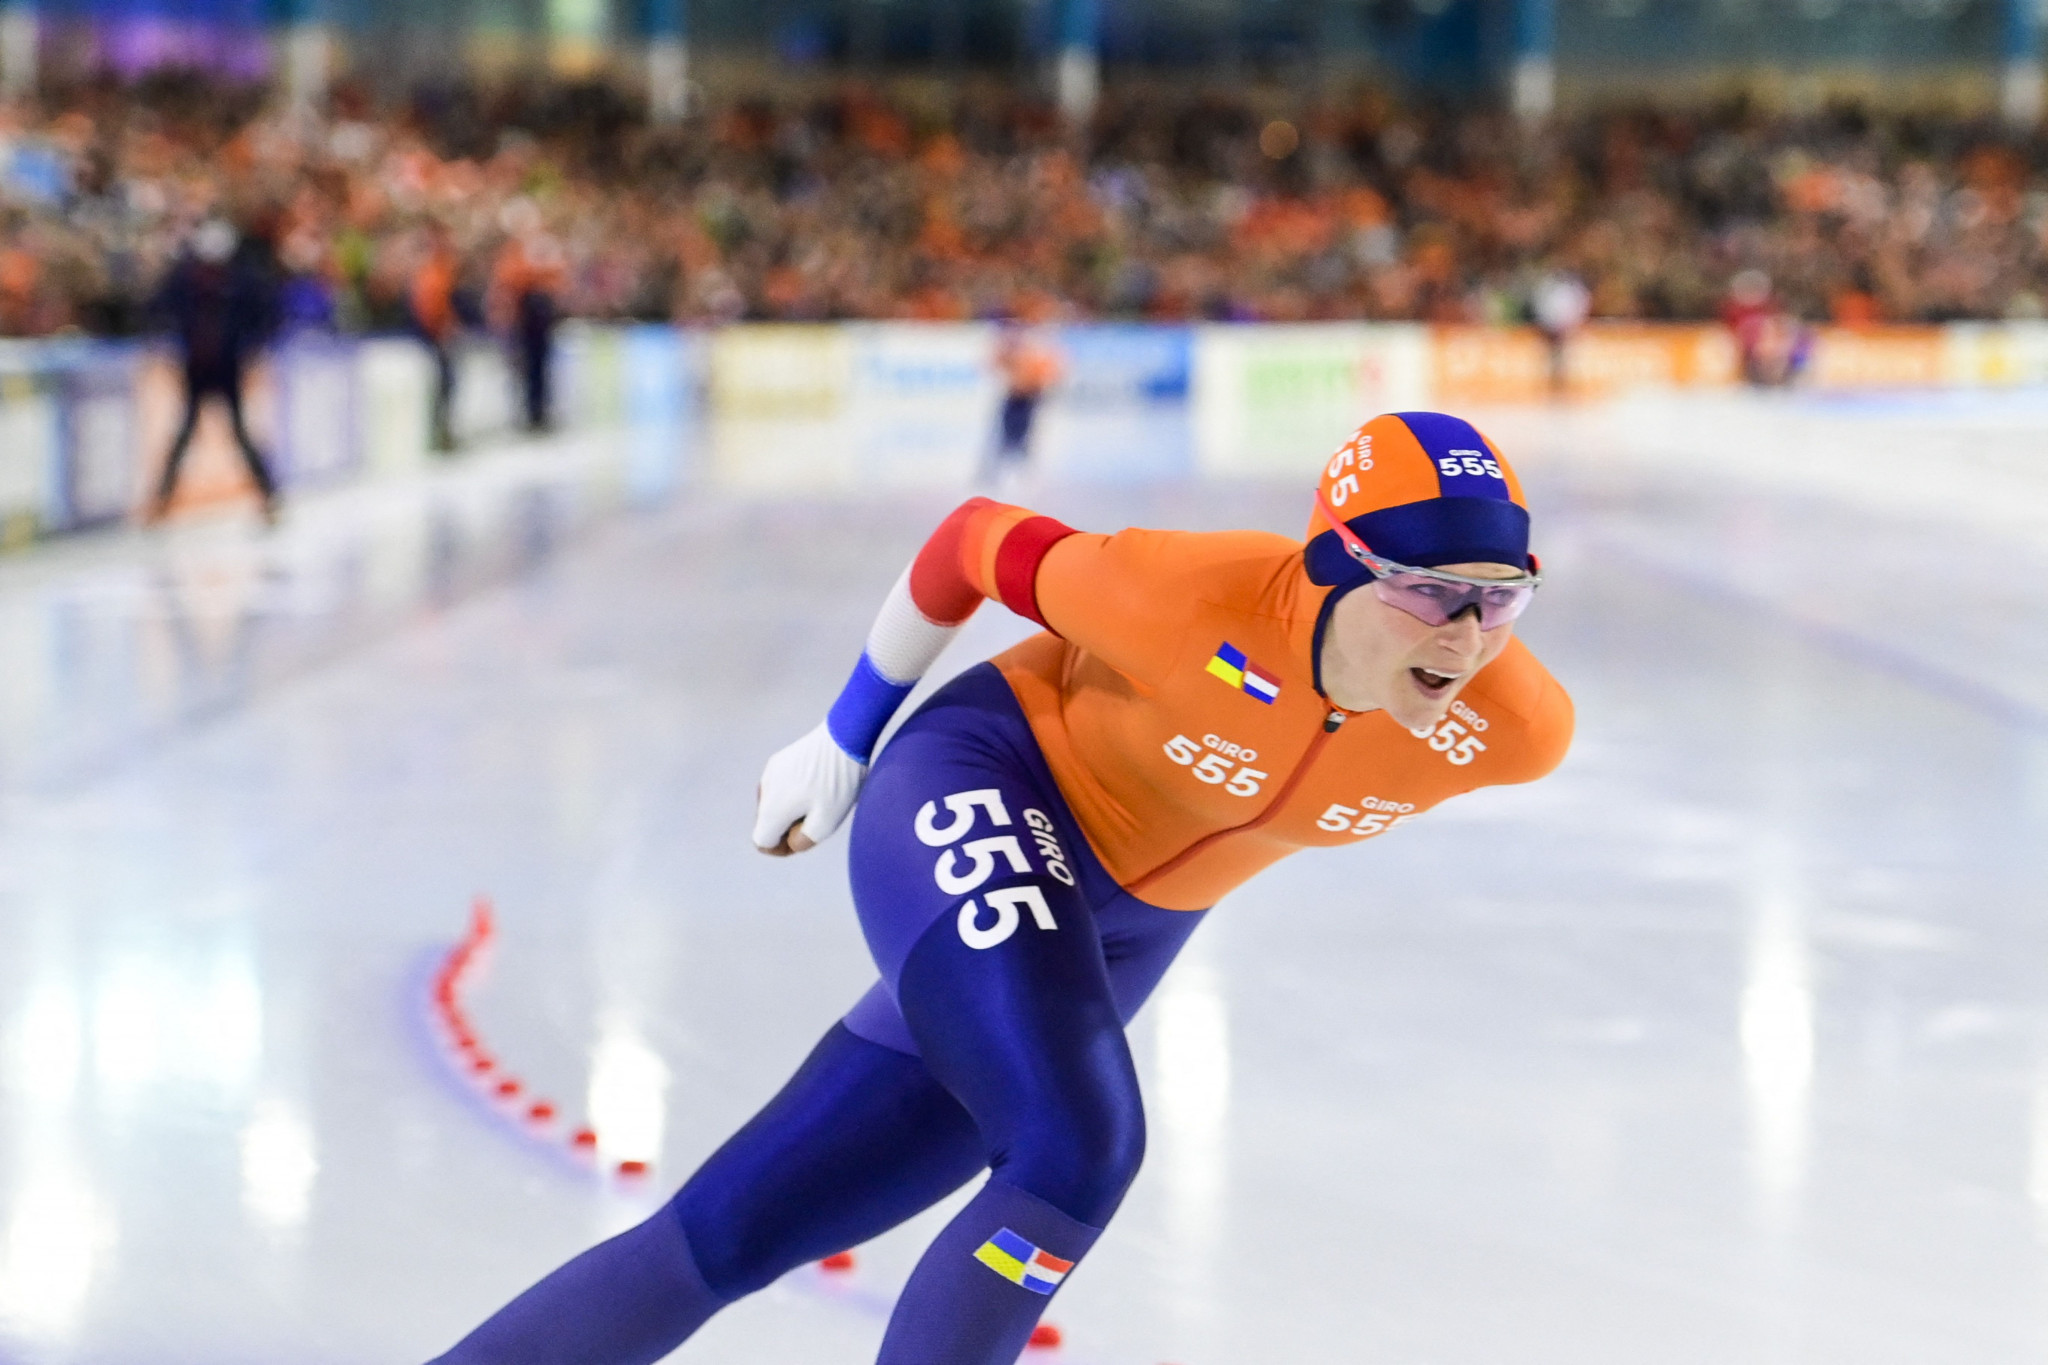 The Netherlands' Irene Schouten earned the women's ISU Speed Skating World Cup distance title with victory before home fans in Heerenveen ©Getty Images